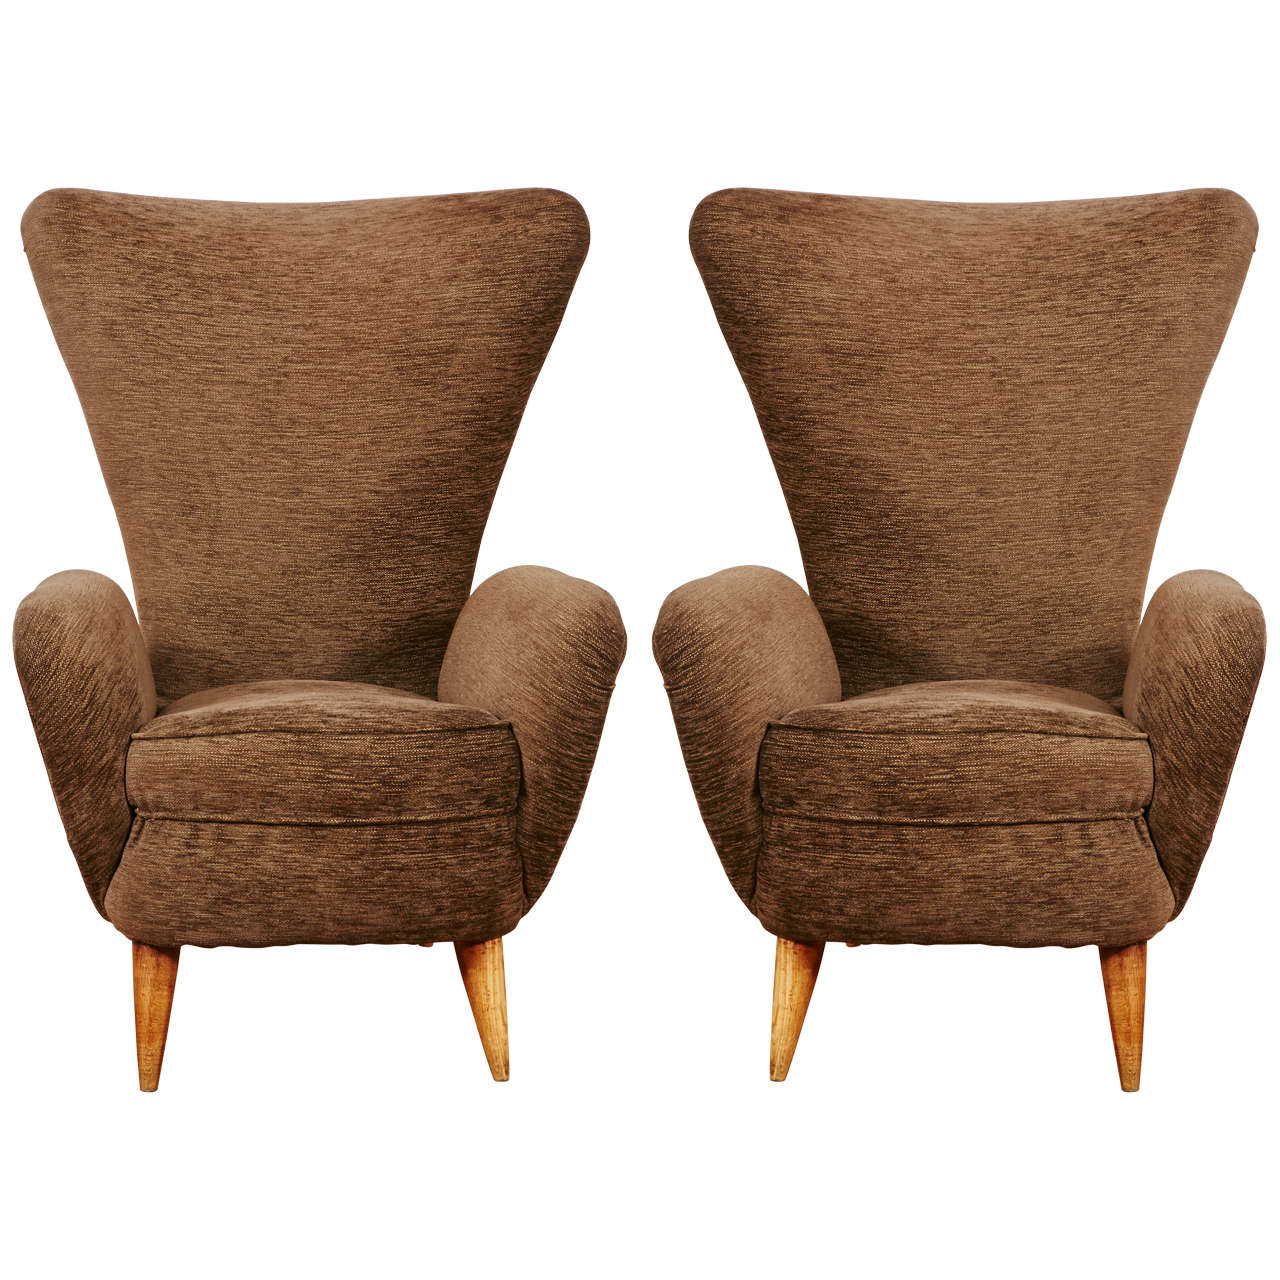 Pair of high armchairs, Italy, 1950's